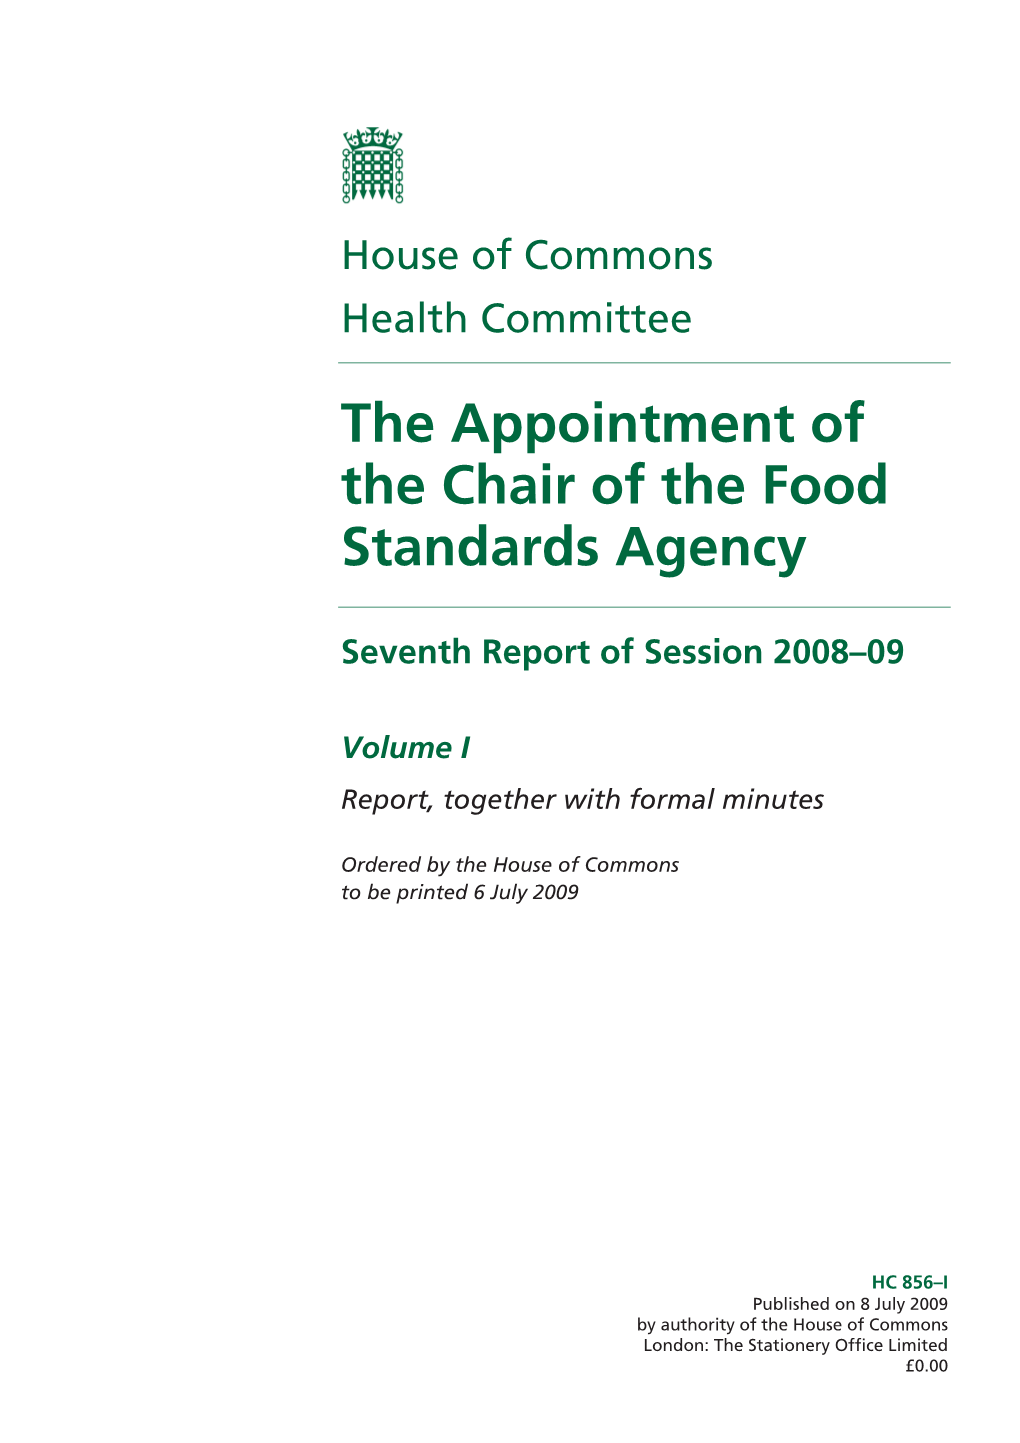 The Appointment of the Chair of the Food Standards Agency